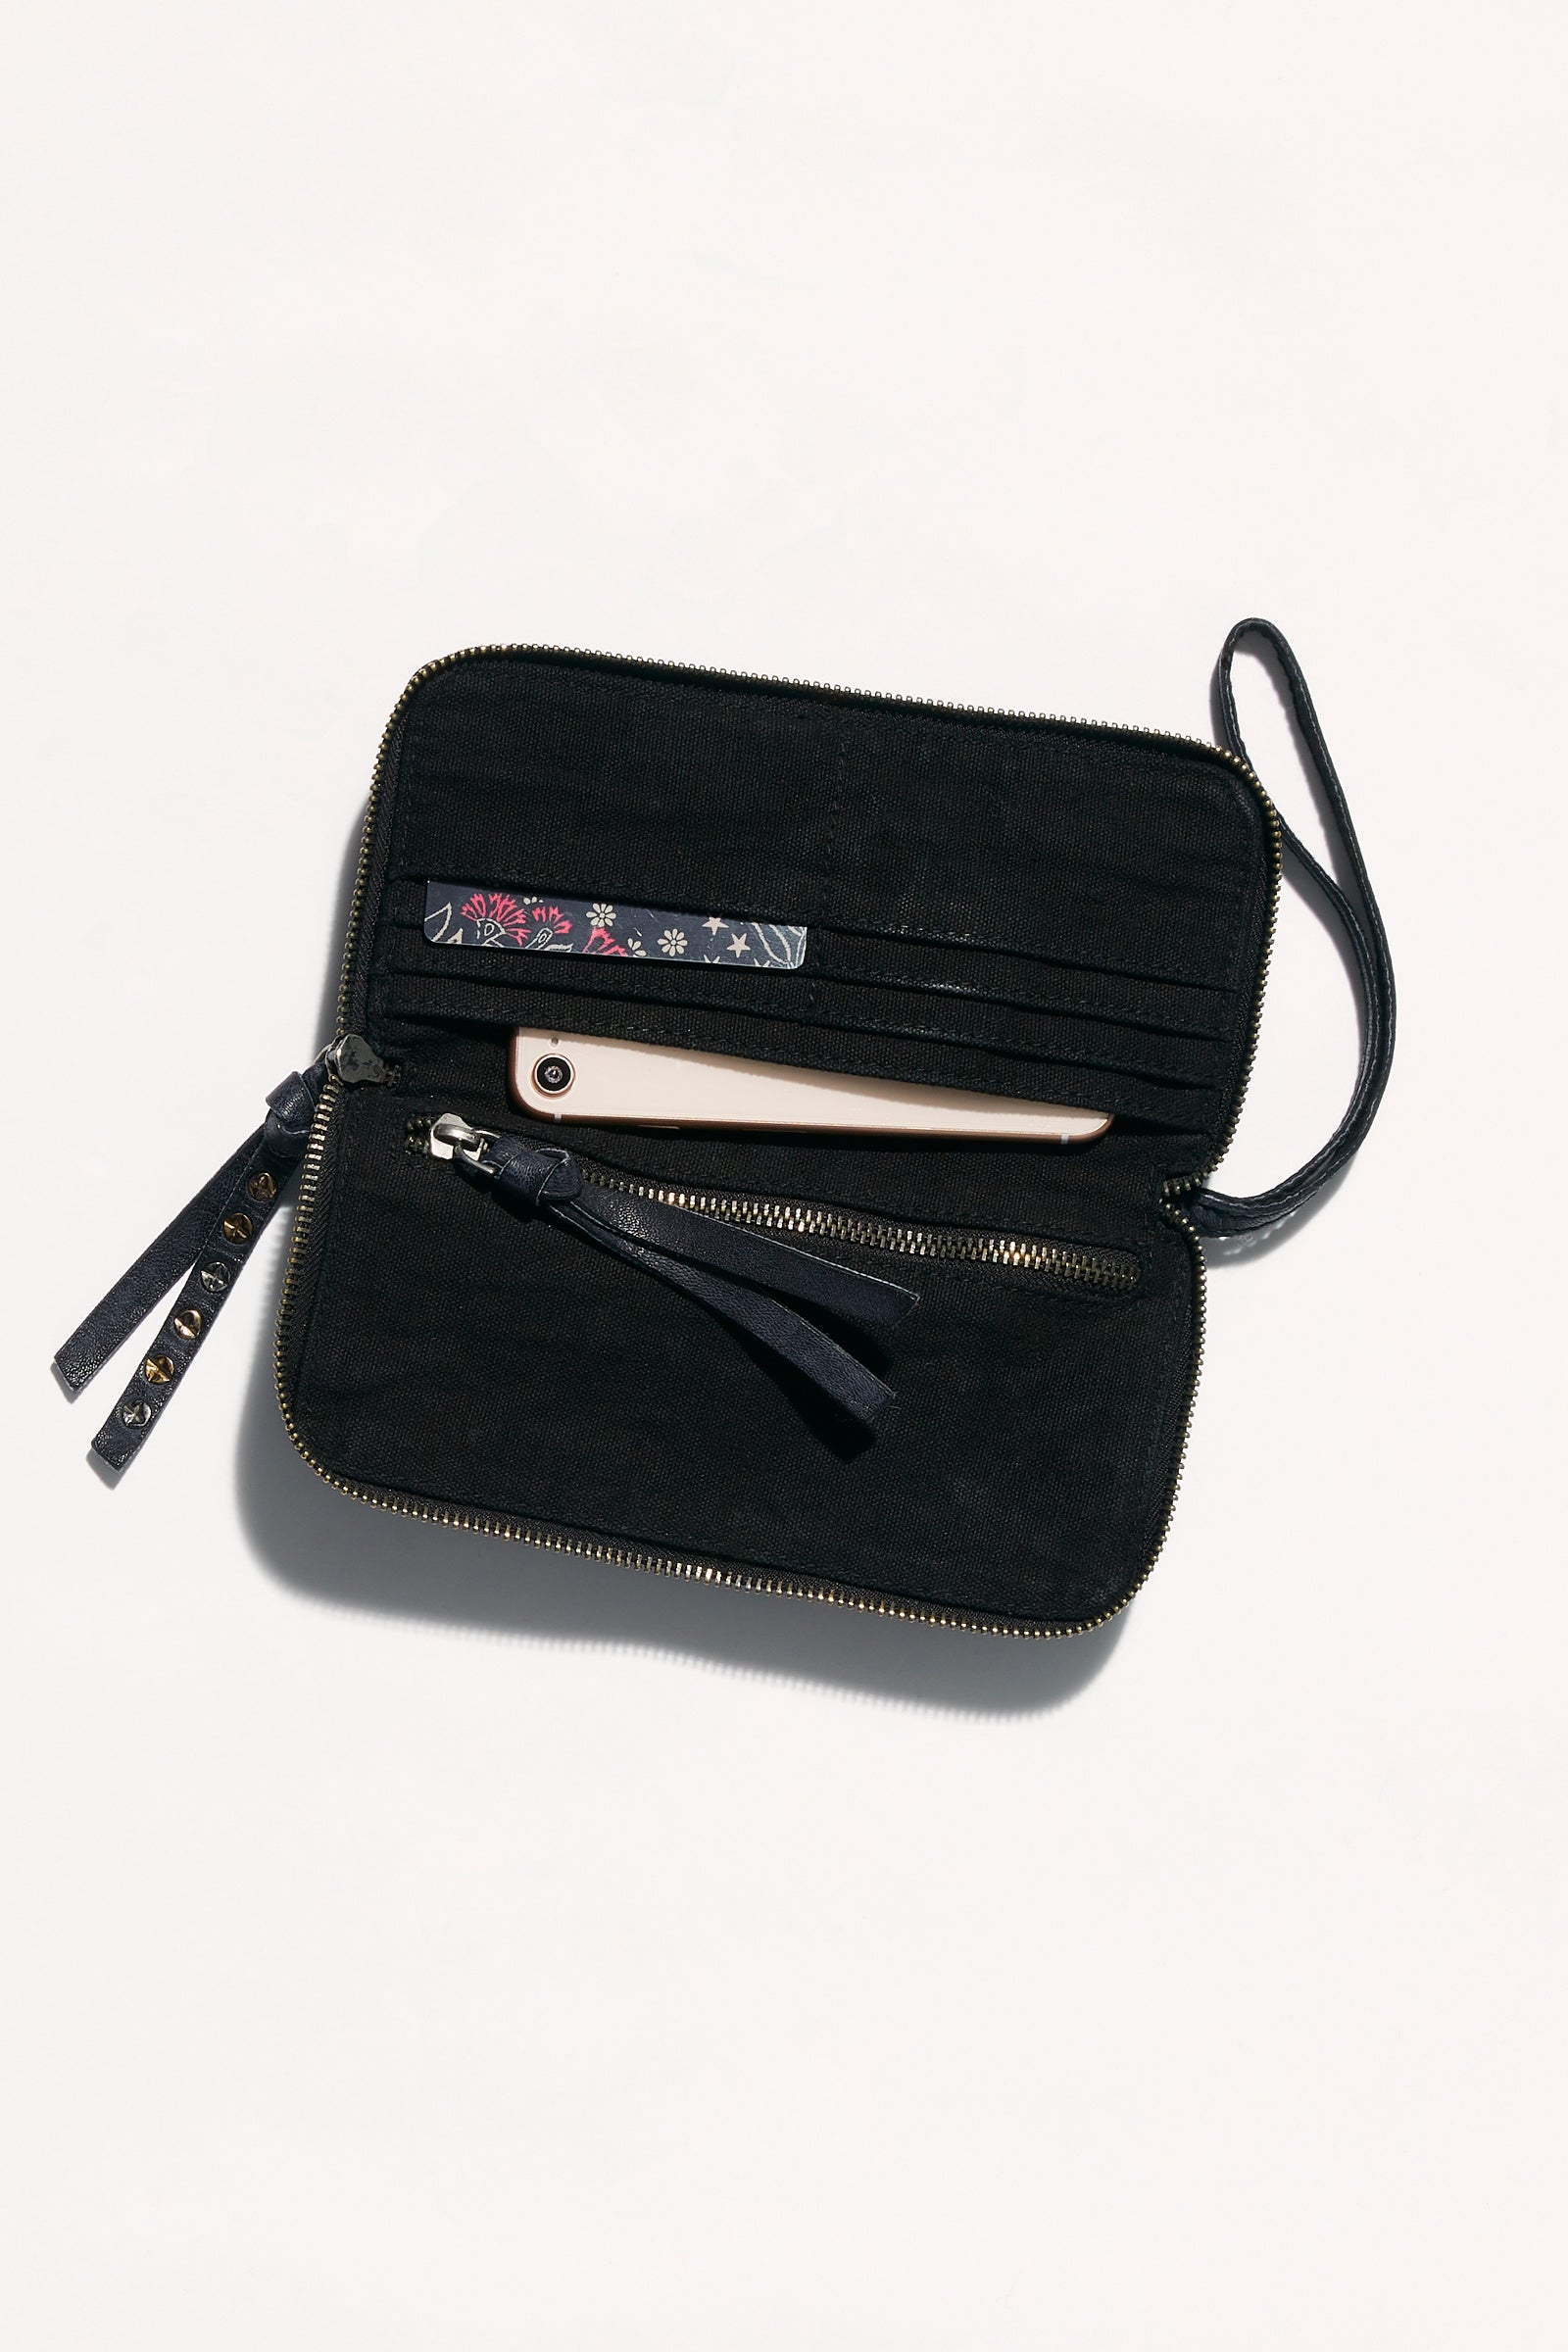 Free People Distressed Leather Wallet in Black, Stone White and Pink